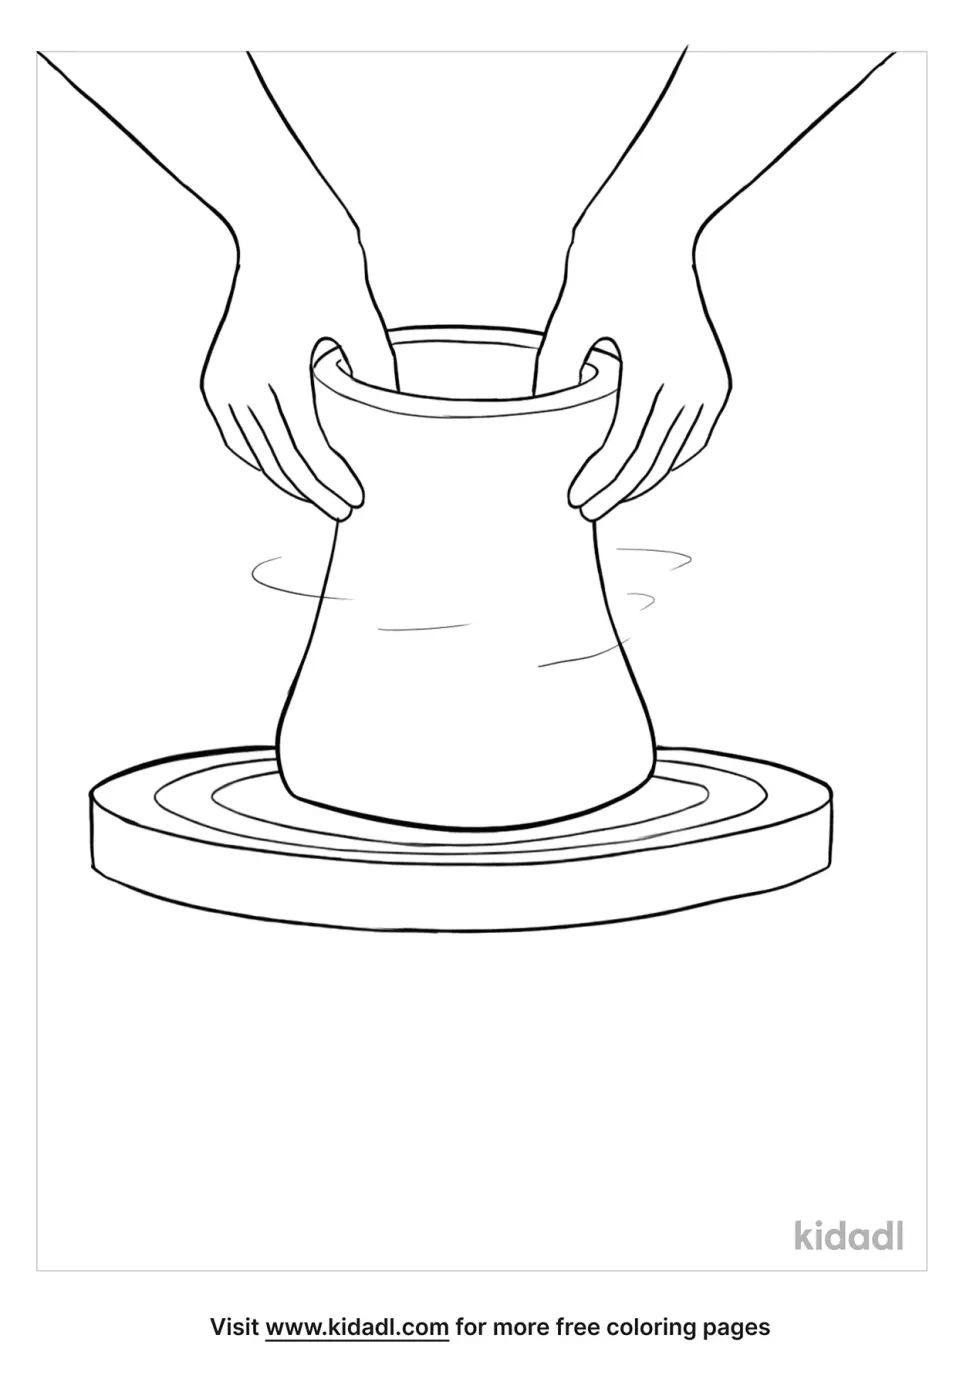 Isaiah Potters Wheel Coloring Page